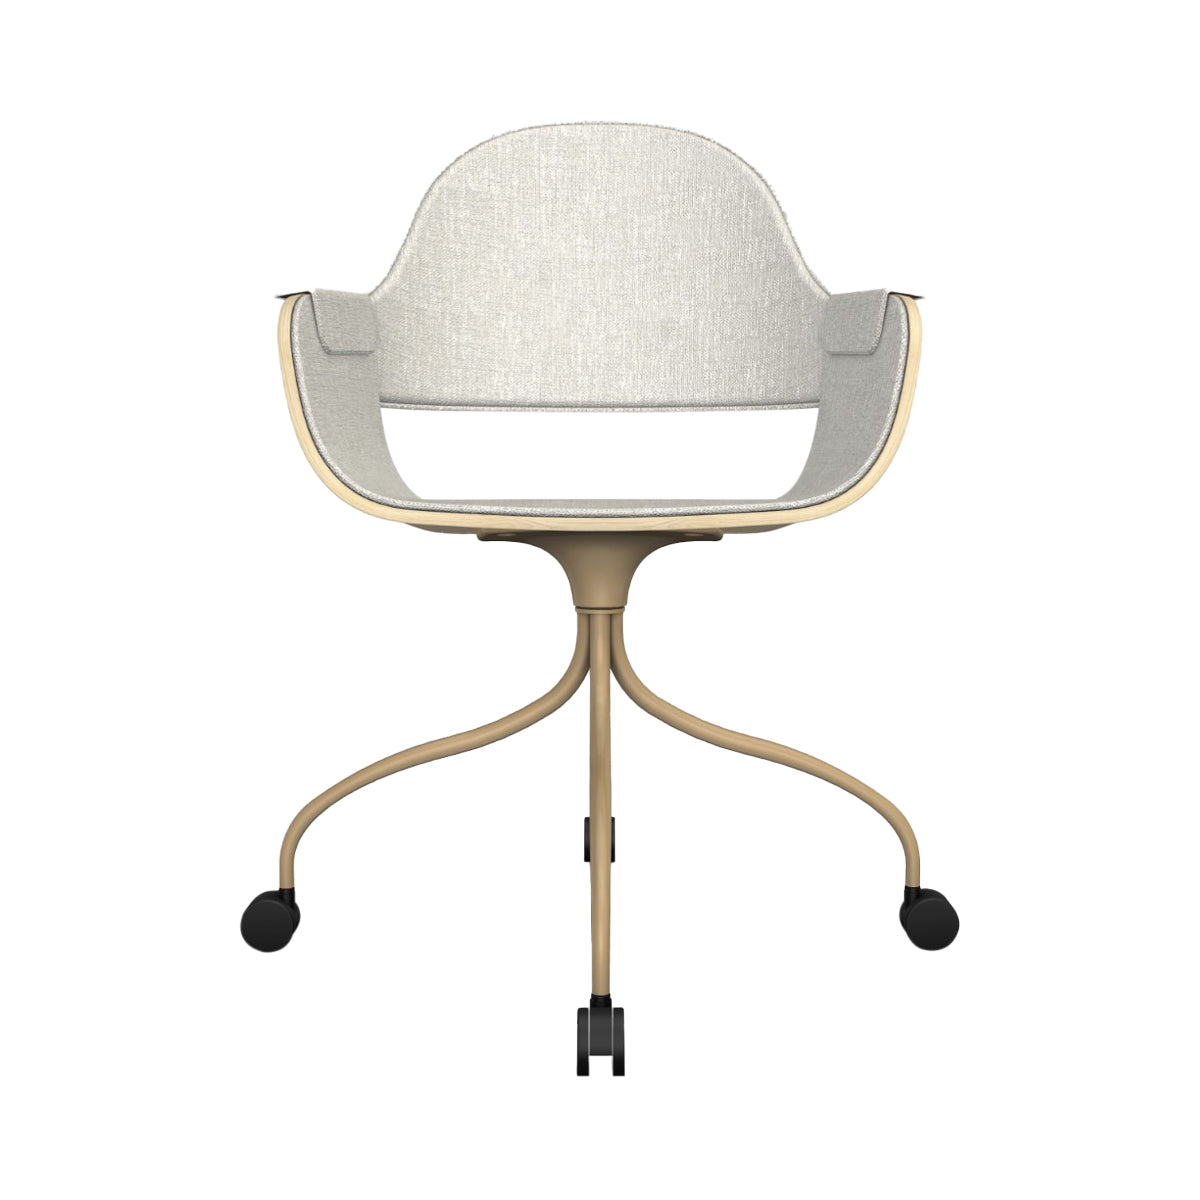 Showtime Nude Chair with Wheel: Full Upholstered + Natural Ash + Beige